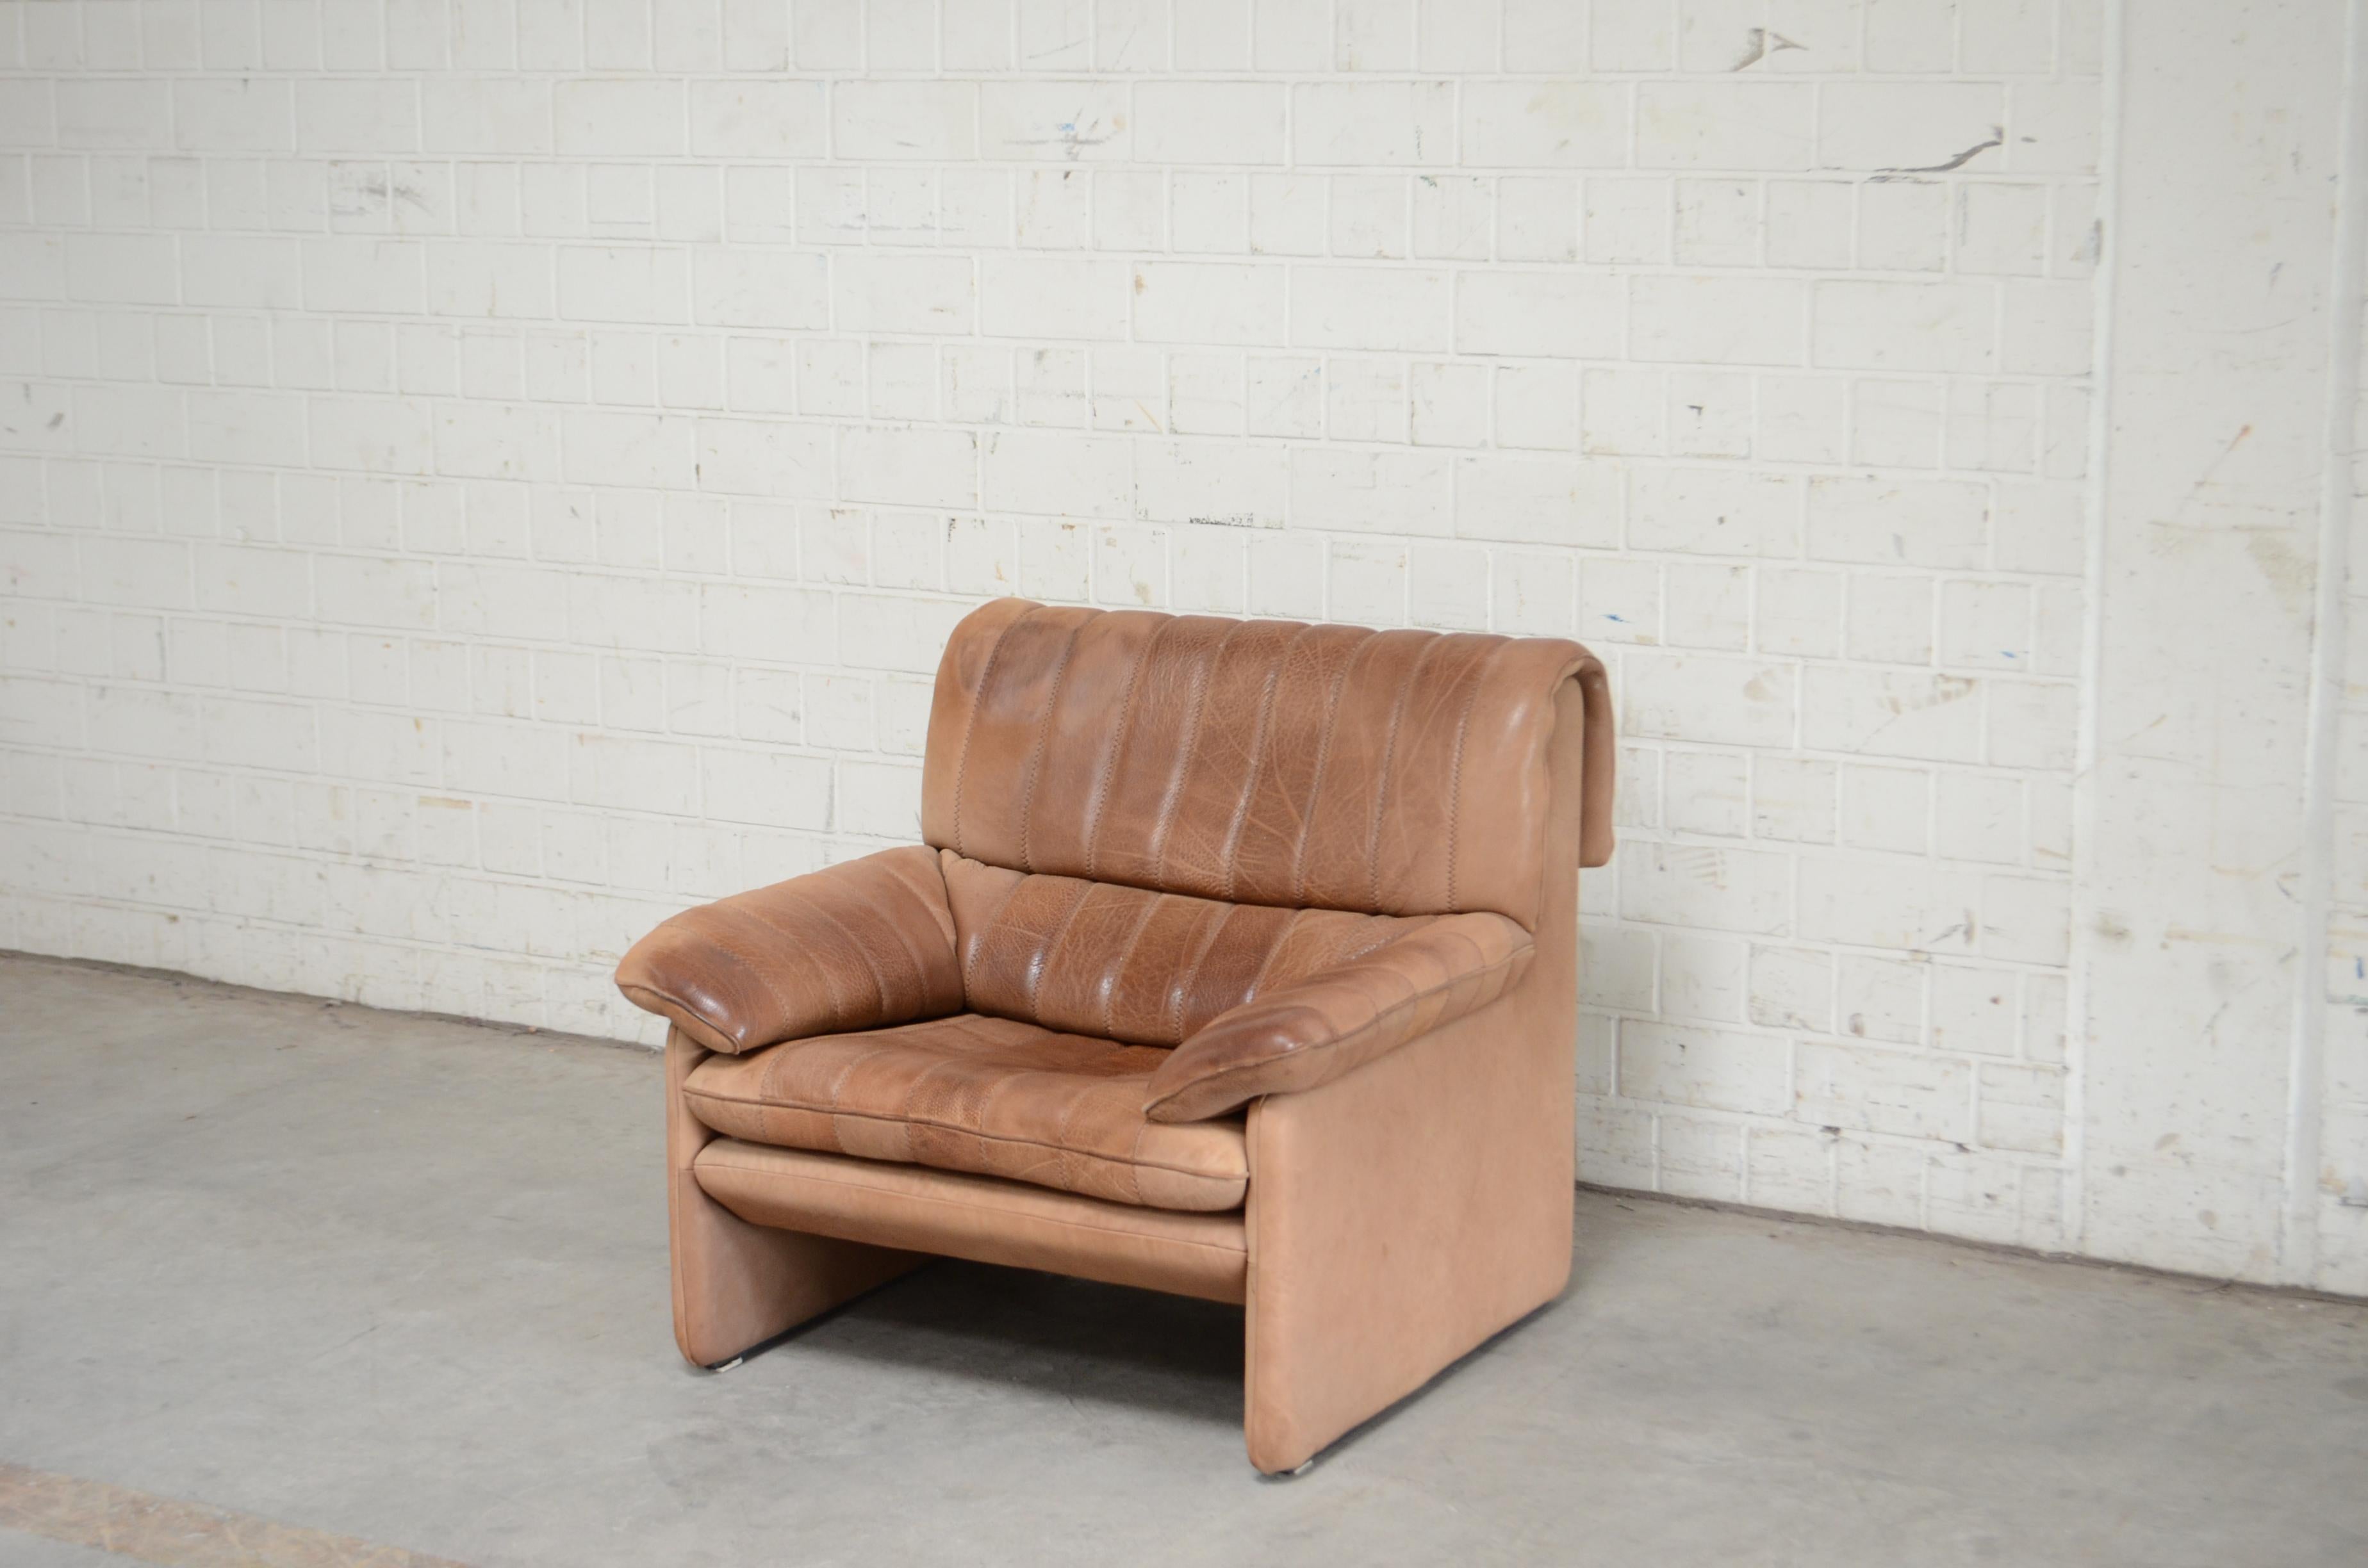 Vintage leather armchair by De Sede.
Model Ds 86.
Thick neck leather with bright nature brown color.
Great comfort.
With patina on the armrests and seating pillow.
De Sede is a Switzerland furniture company that creates leather furniture with